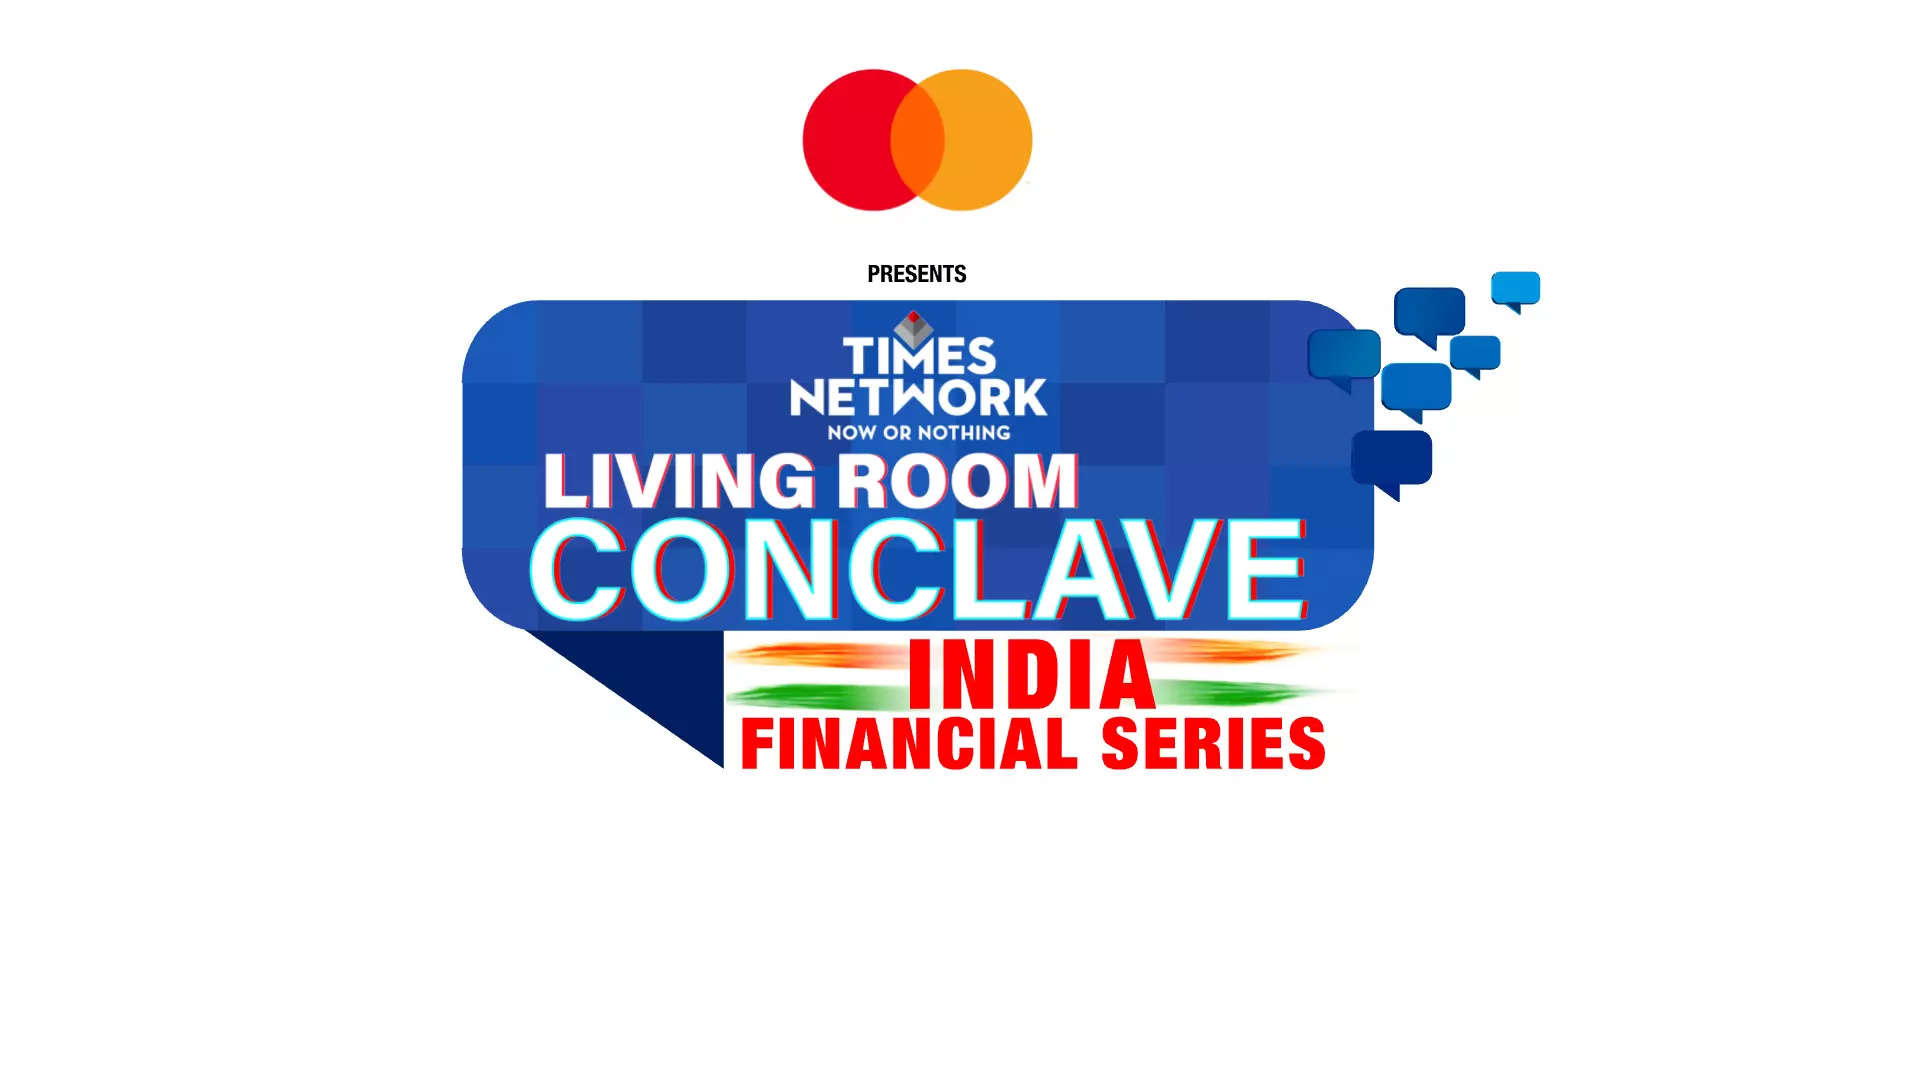 Mastercard Presents Times Network Living Room Conclave  India Financial Series